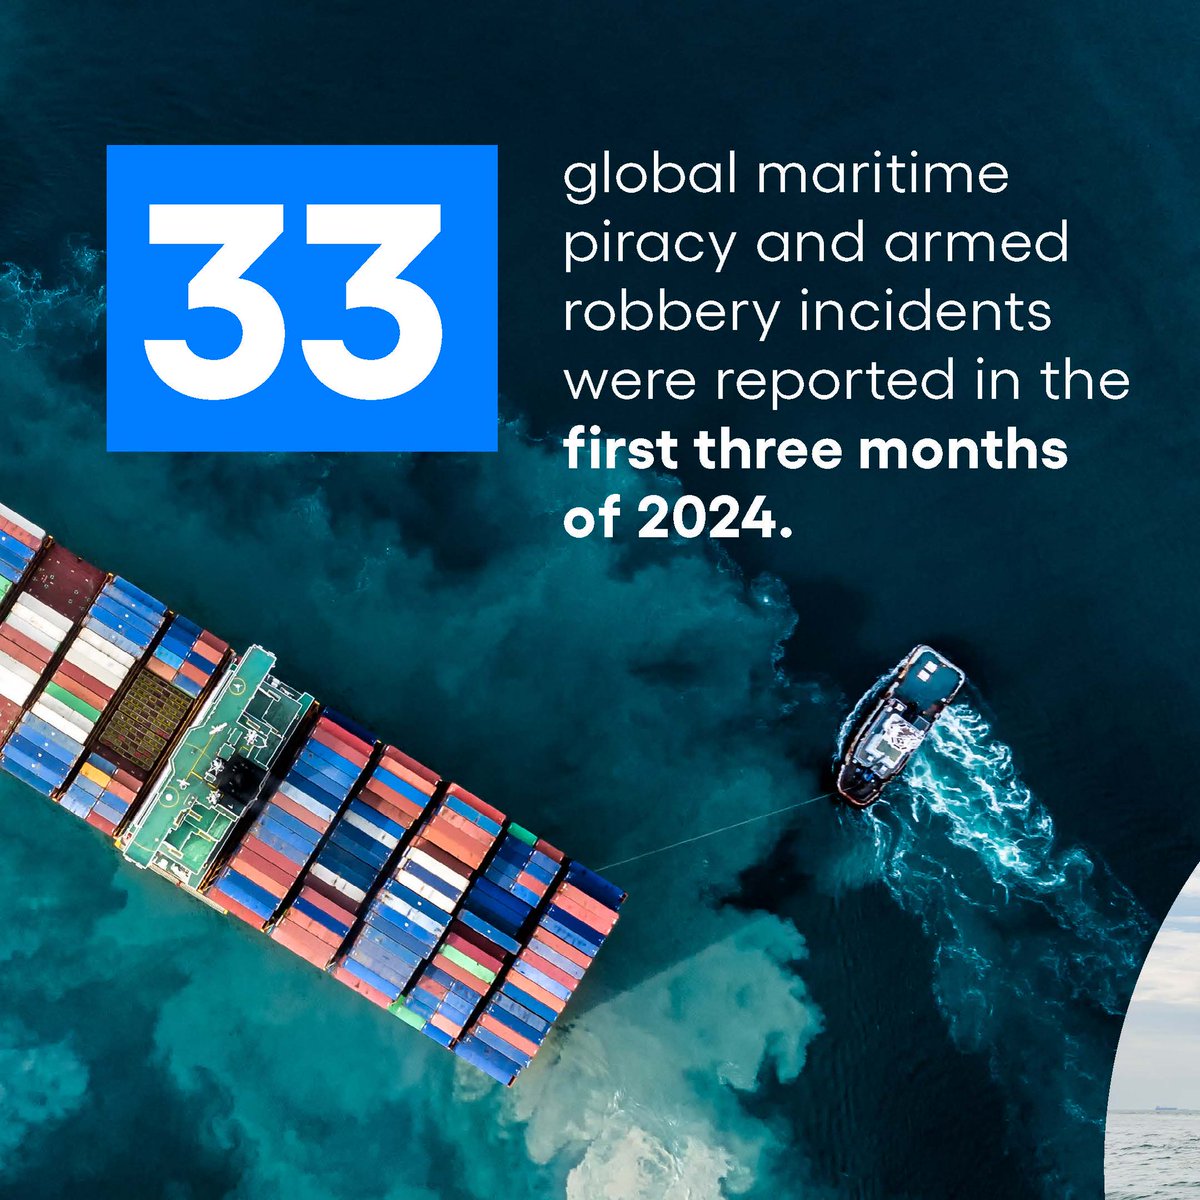 🚨 New Report Alert: The ICC @IMB_Piracy raises concerns on the persistent threat of Somali piracy in its Q1 2024 report. #IMBPiracy Read the full report here: bit.ly/3PYyEtQ